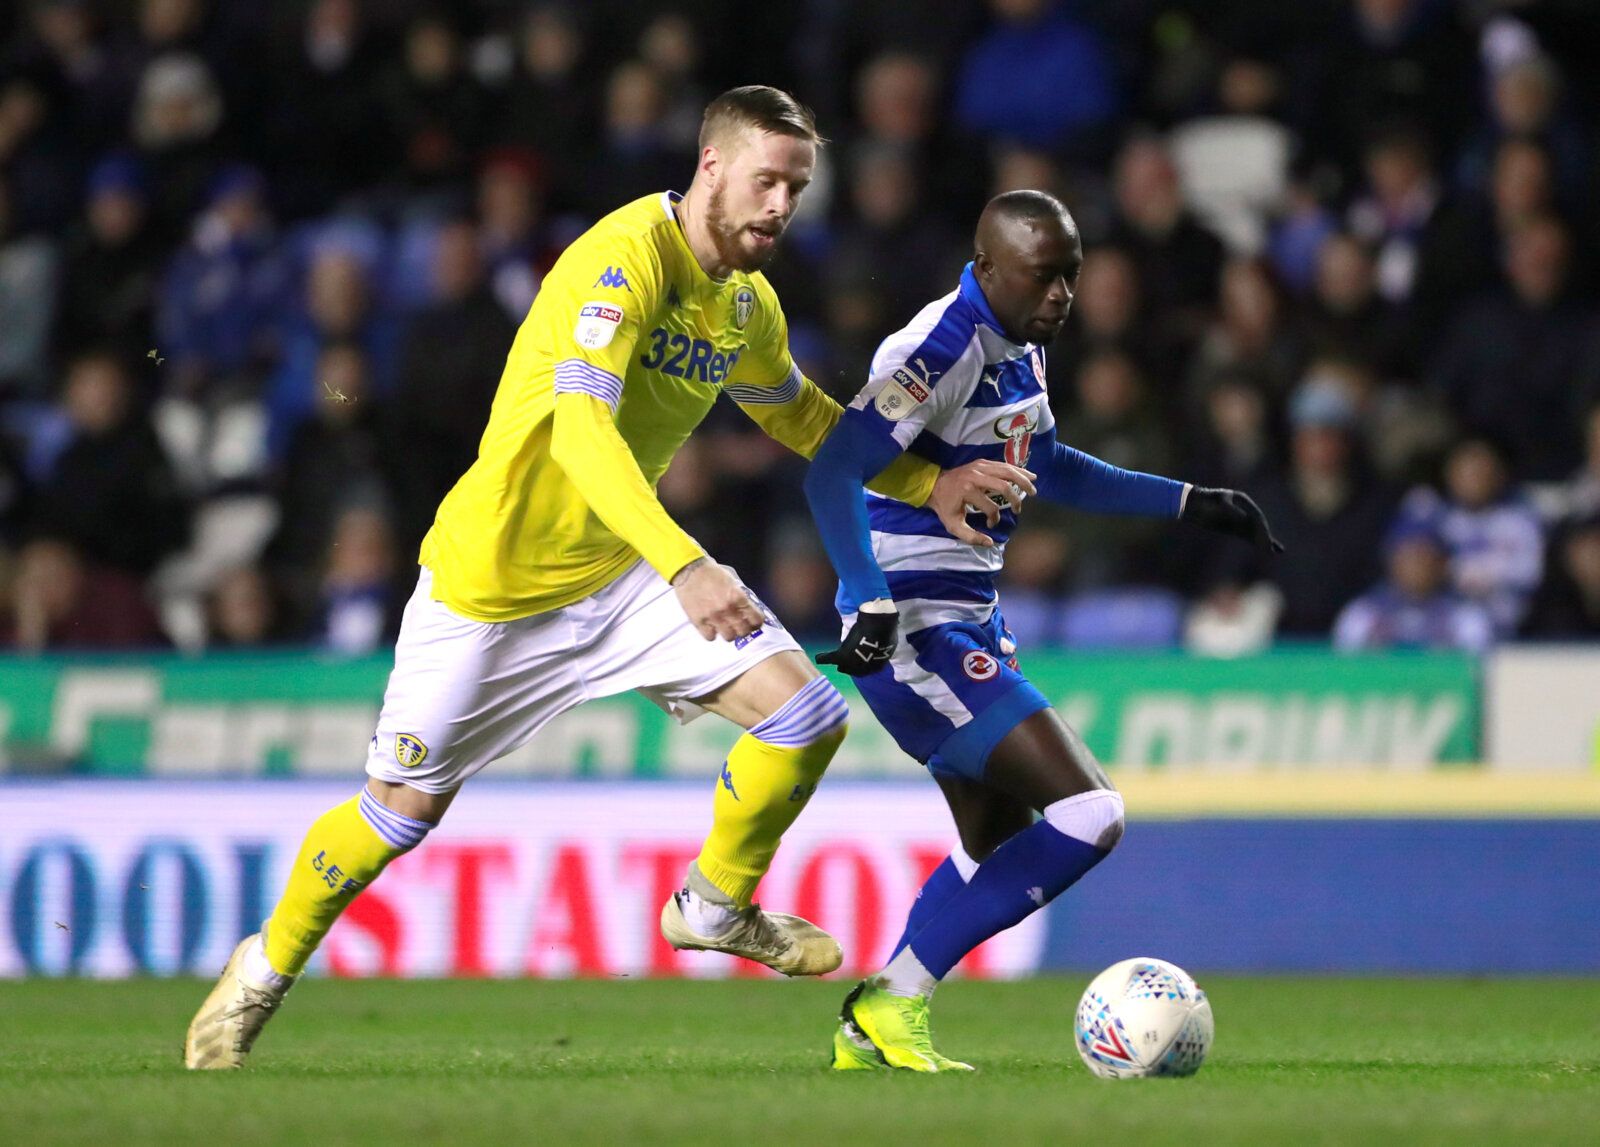 Soccer Football - Championship - Reading v Leeds United - Madejski Stadium, Reading, Britain - March 12, 2019   Reading's Modou Barrow in action with Leeds United's Pontus Jansson   Action Images/Andrew Couldridge    EDITORIAL USE ONLY. No use with unauthorized audio, video, data, fixture lists, club/league logos or 